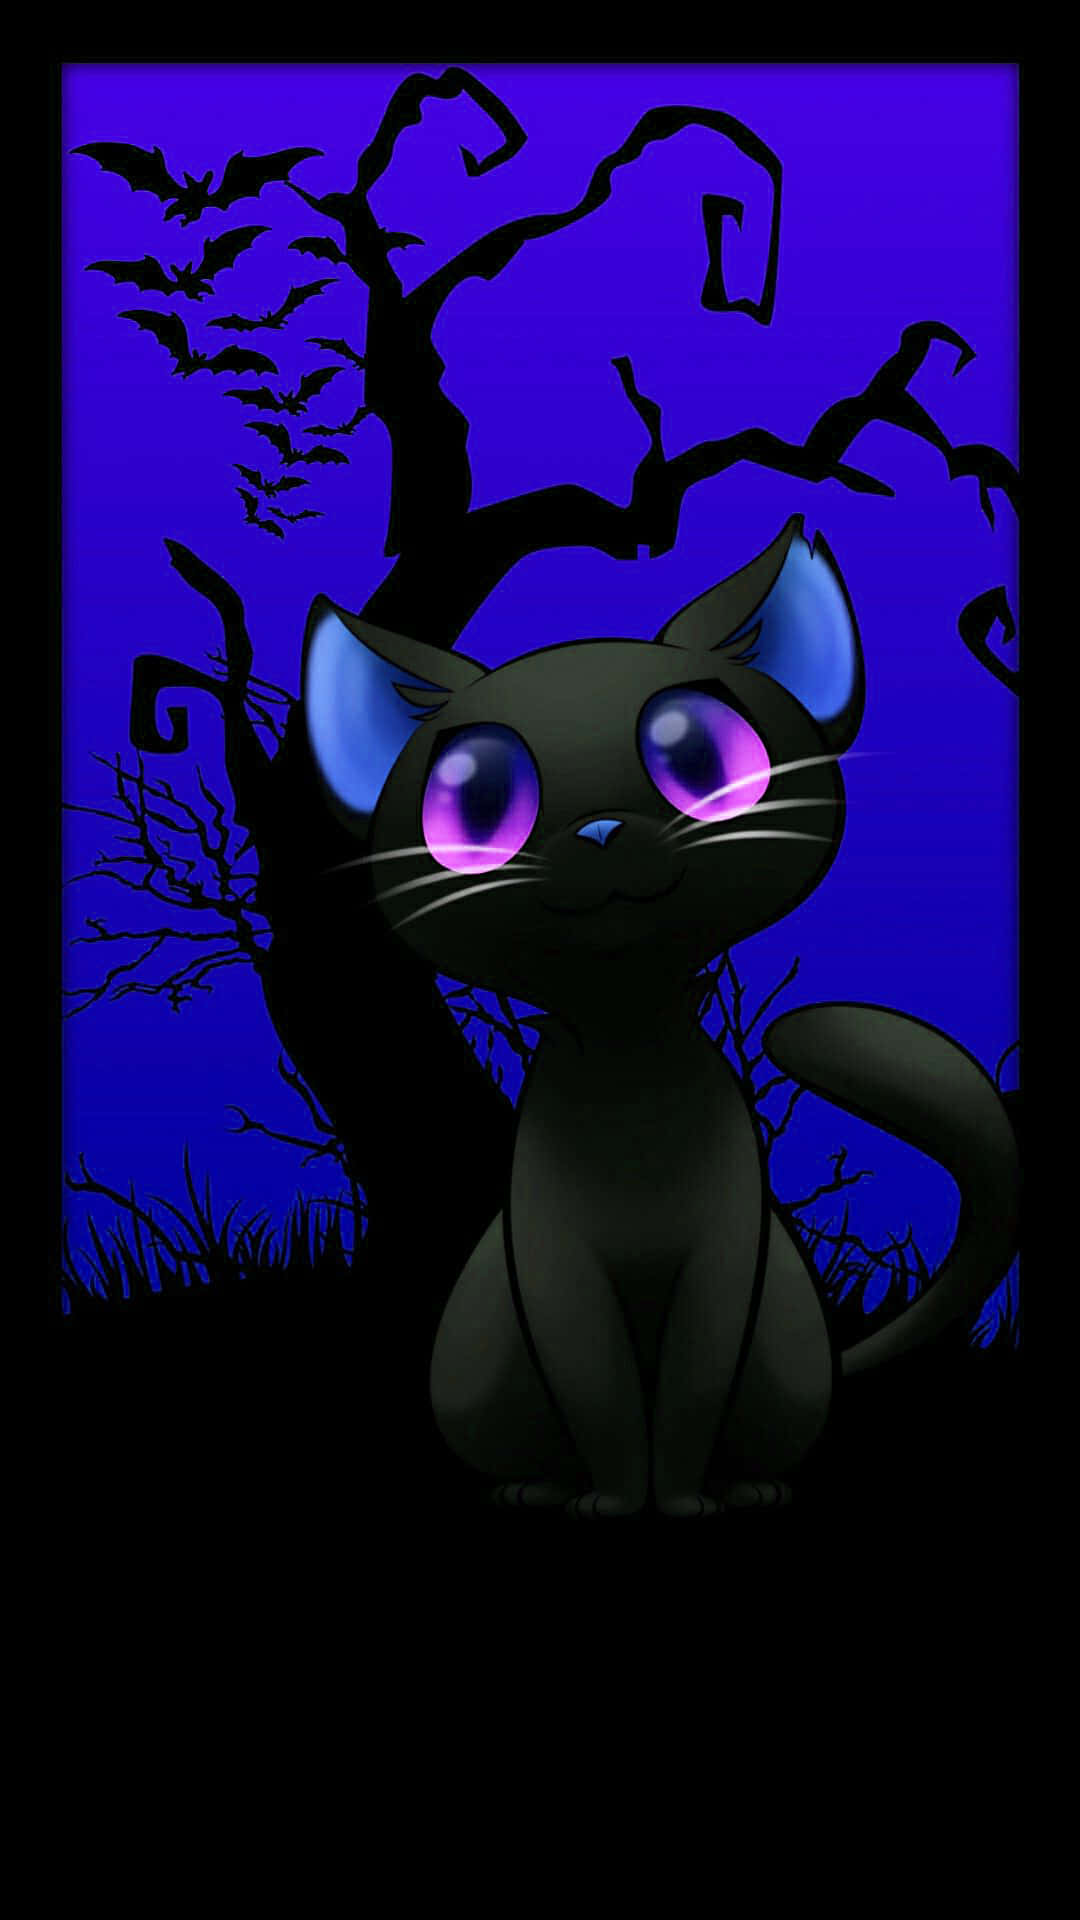 “Put on your scariest costume and get ready to celebrate Halloween with this mischievous kitty!"